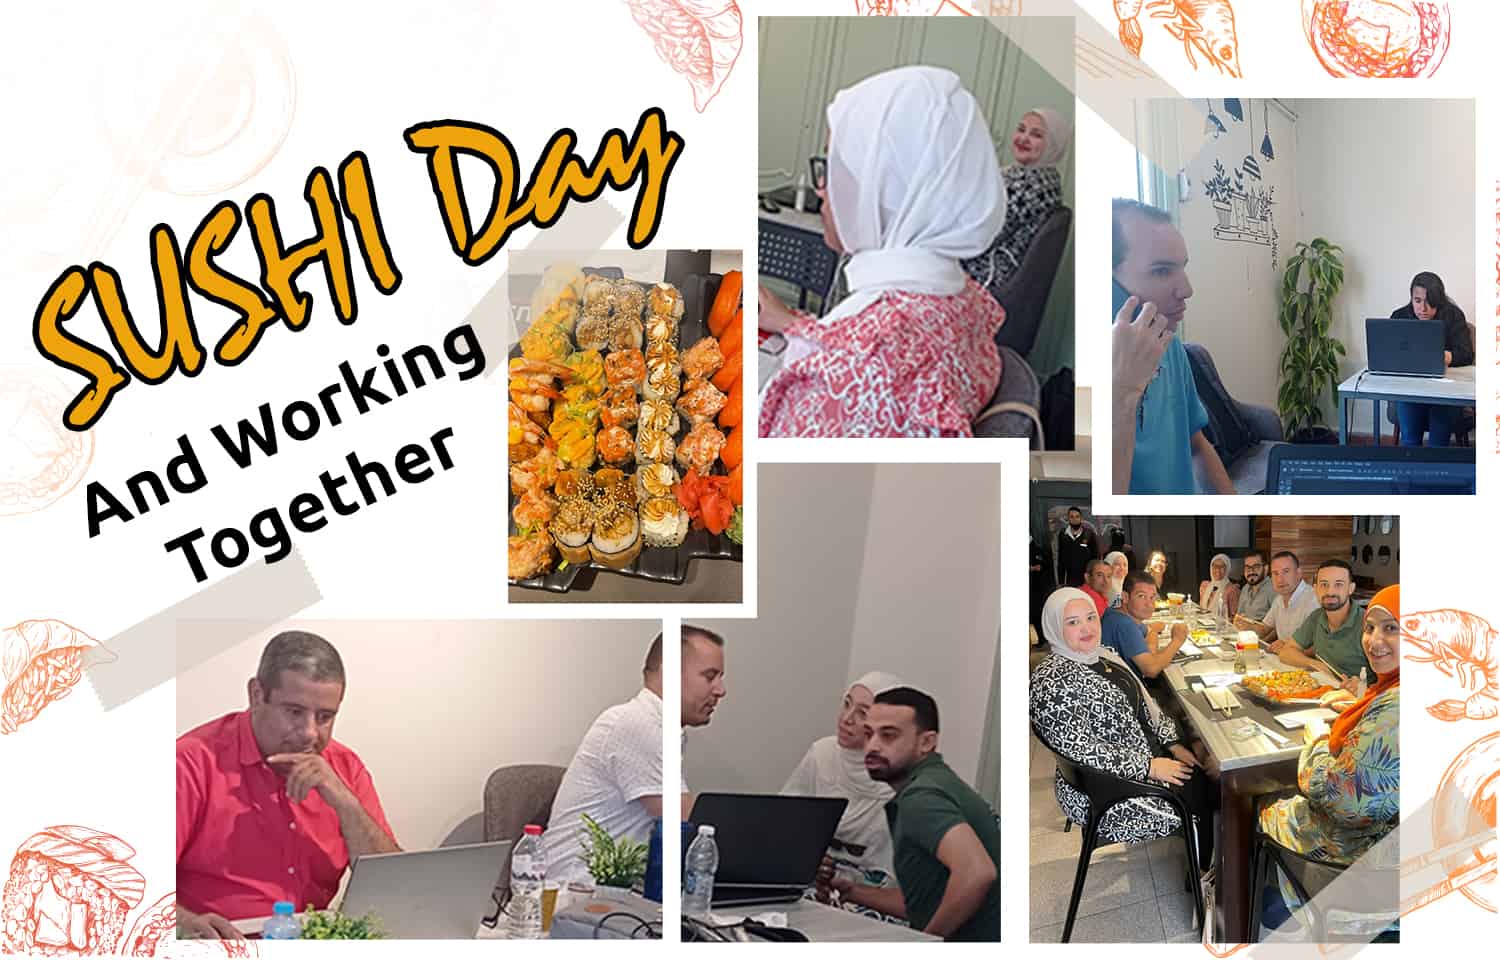 TP Days: Sushi Day and Working Together